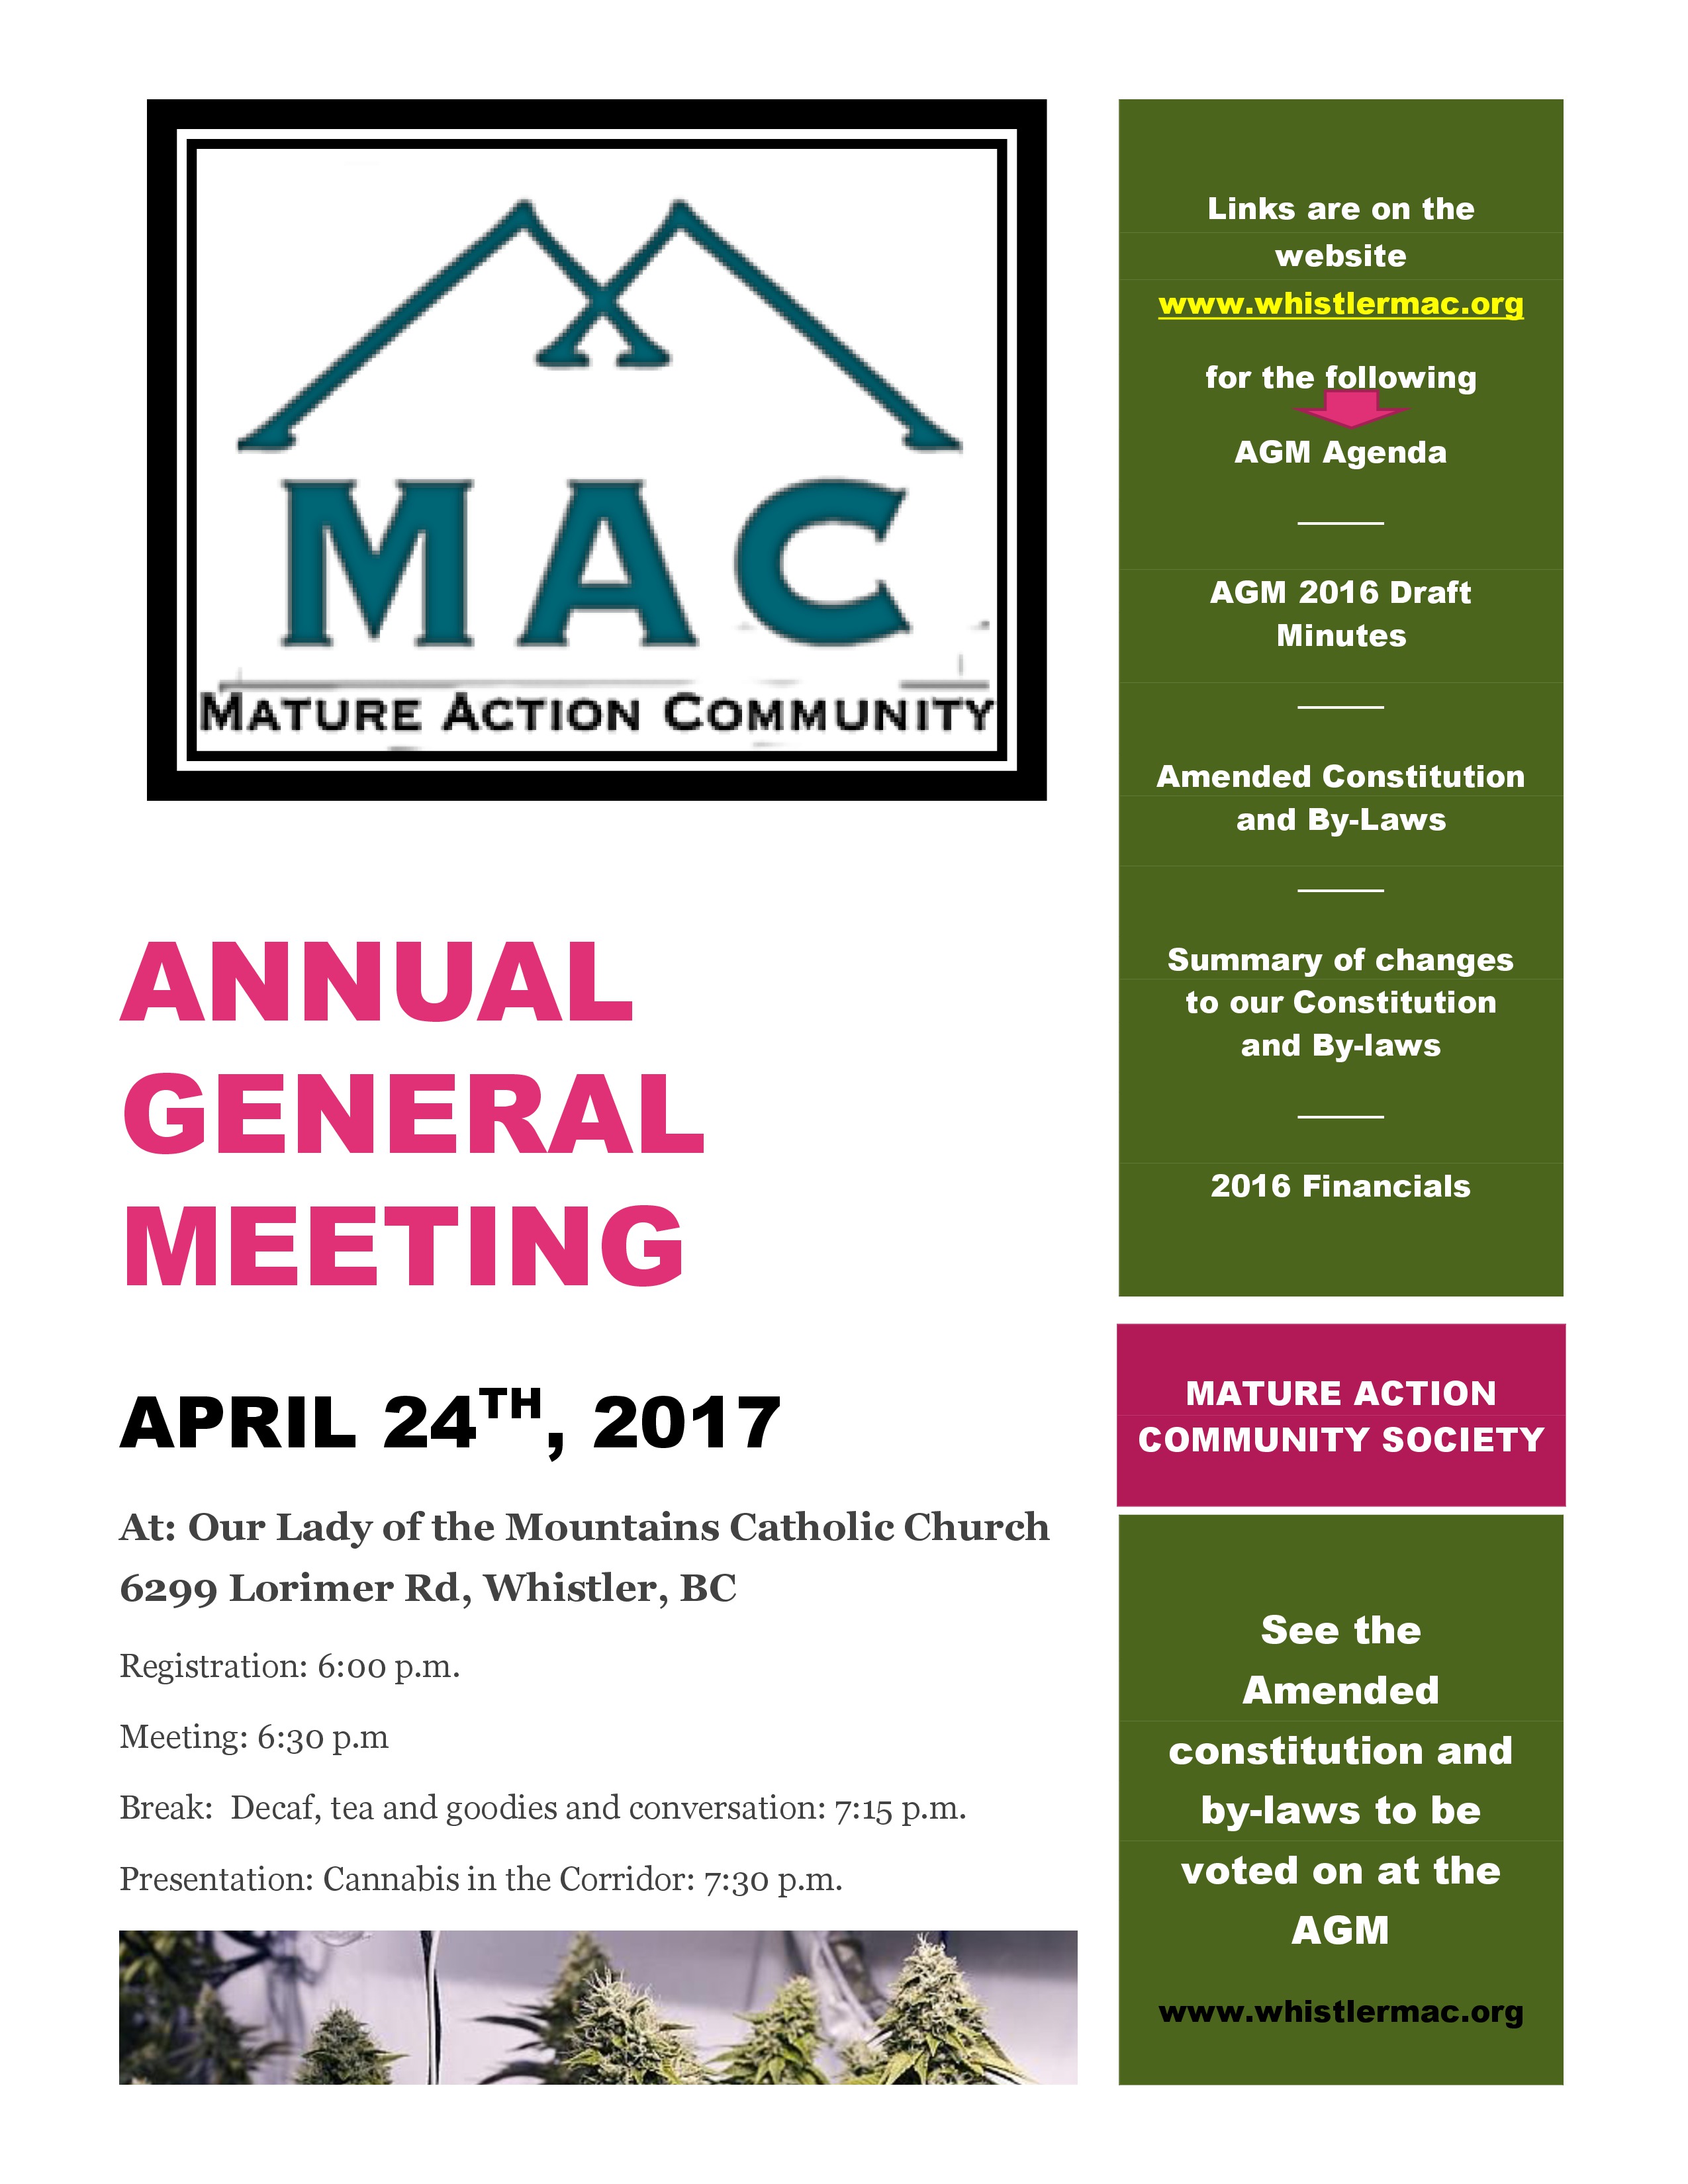 Annual General Meeting draft 1st notice